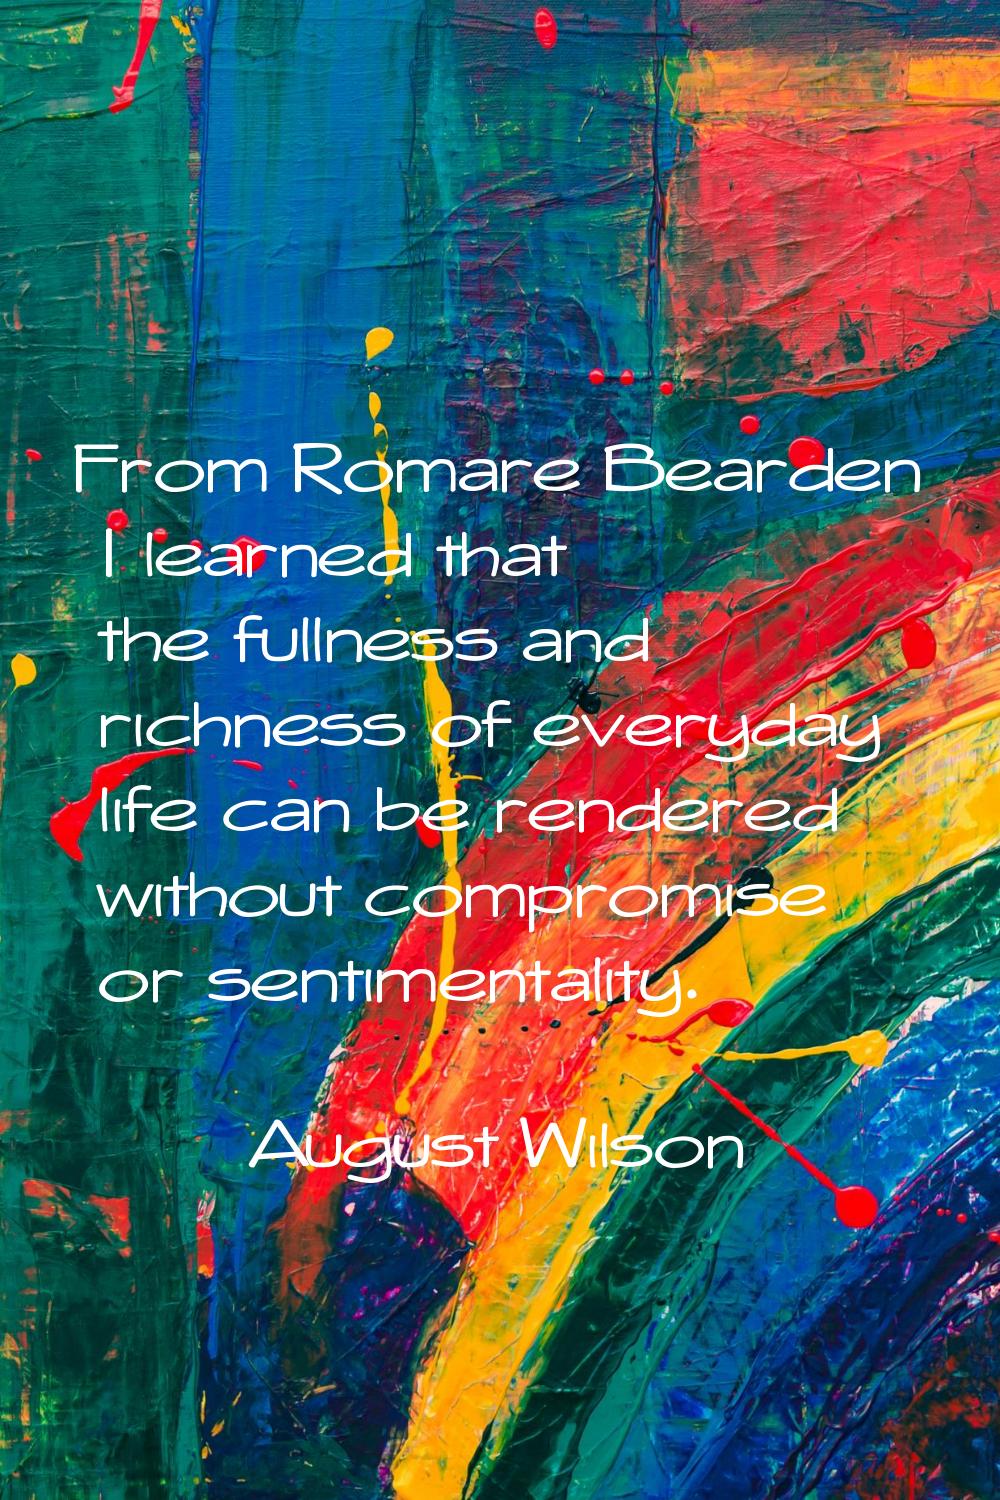 From Romare Bearden I learned that the fullness and richness of everyday life can be rendered witho